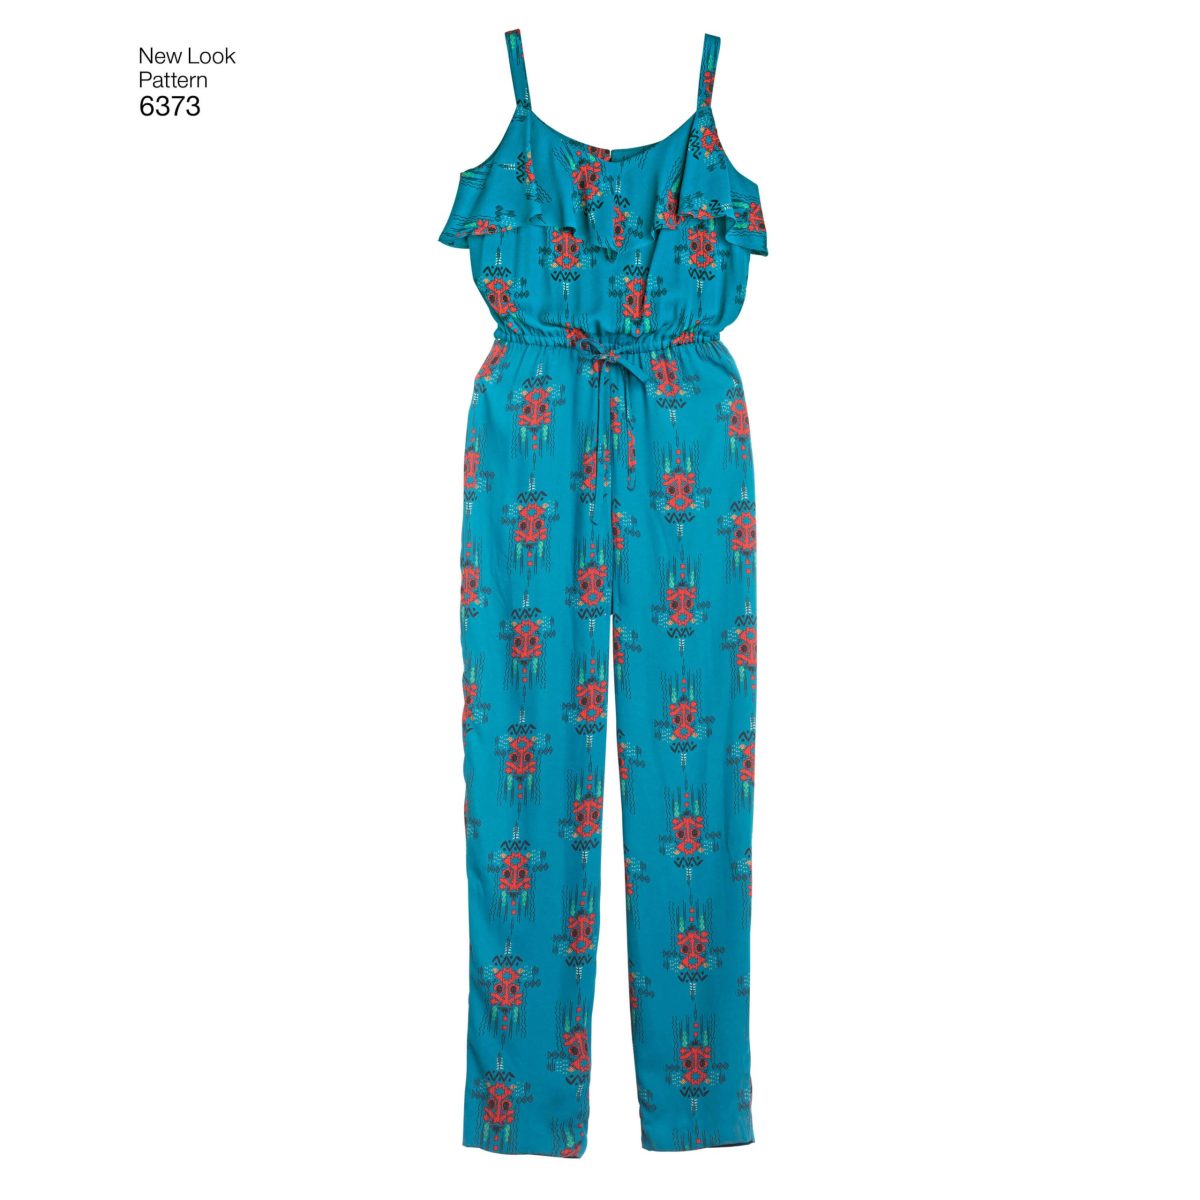 New Look Sewing Pattern N6373 Misses' Jumpsuit or Romper and Dresses